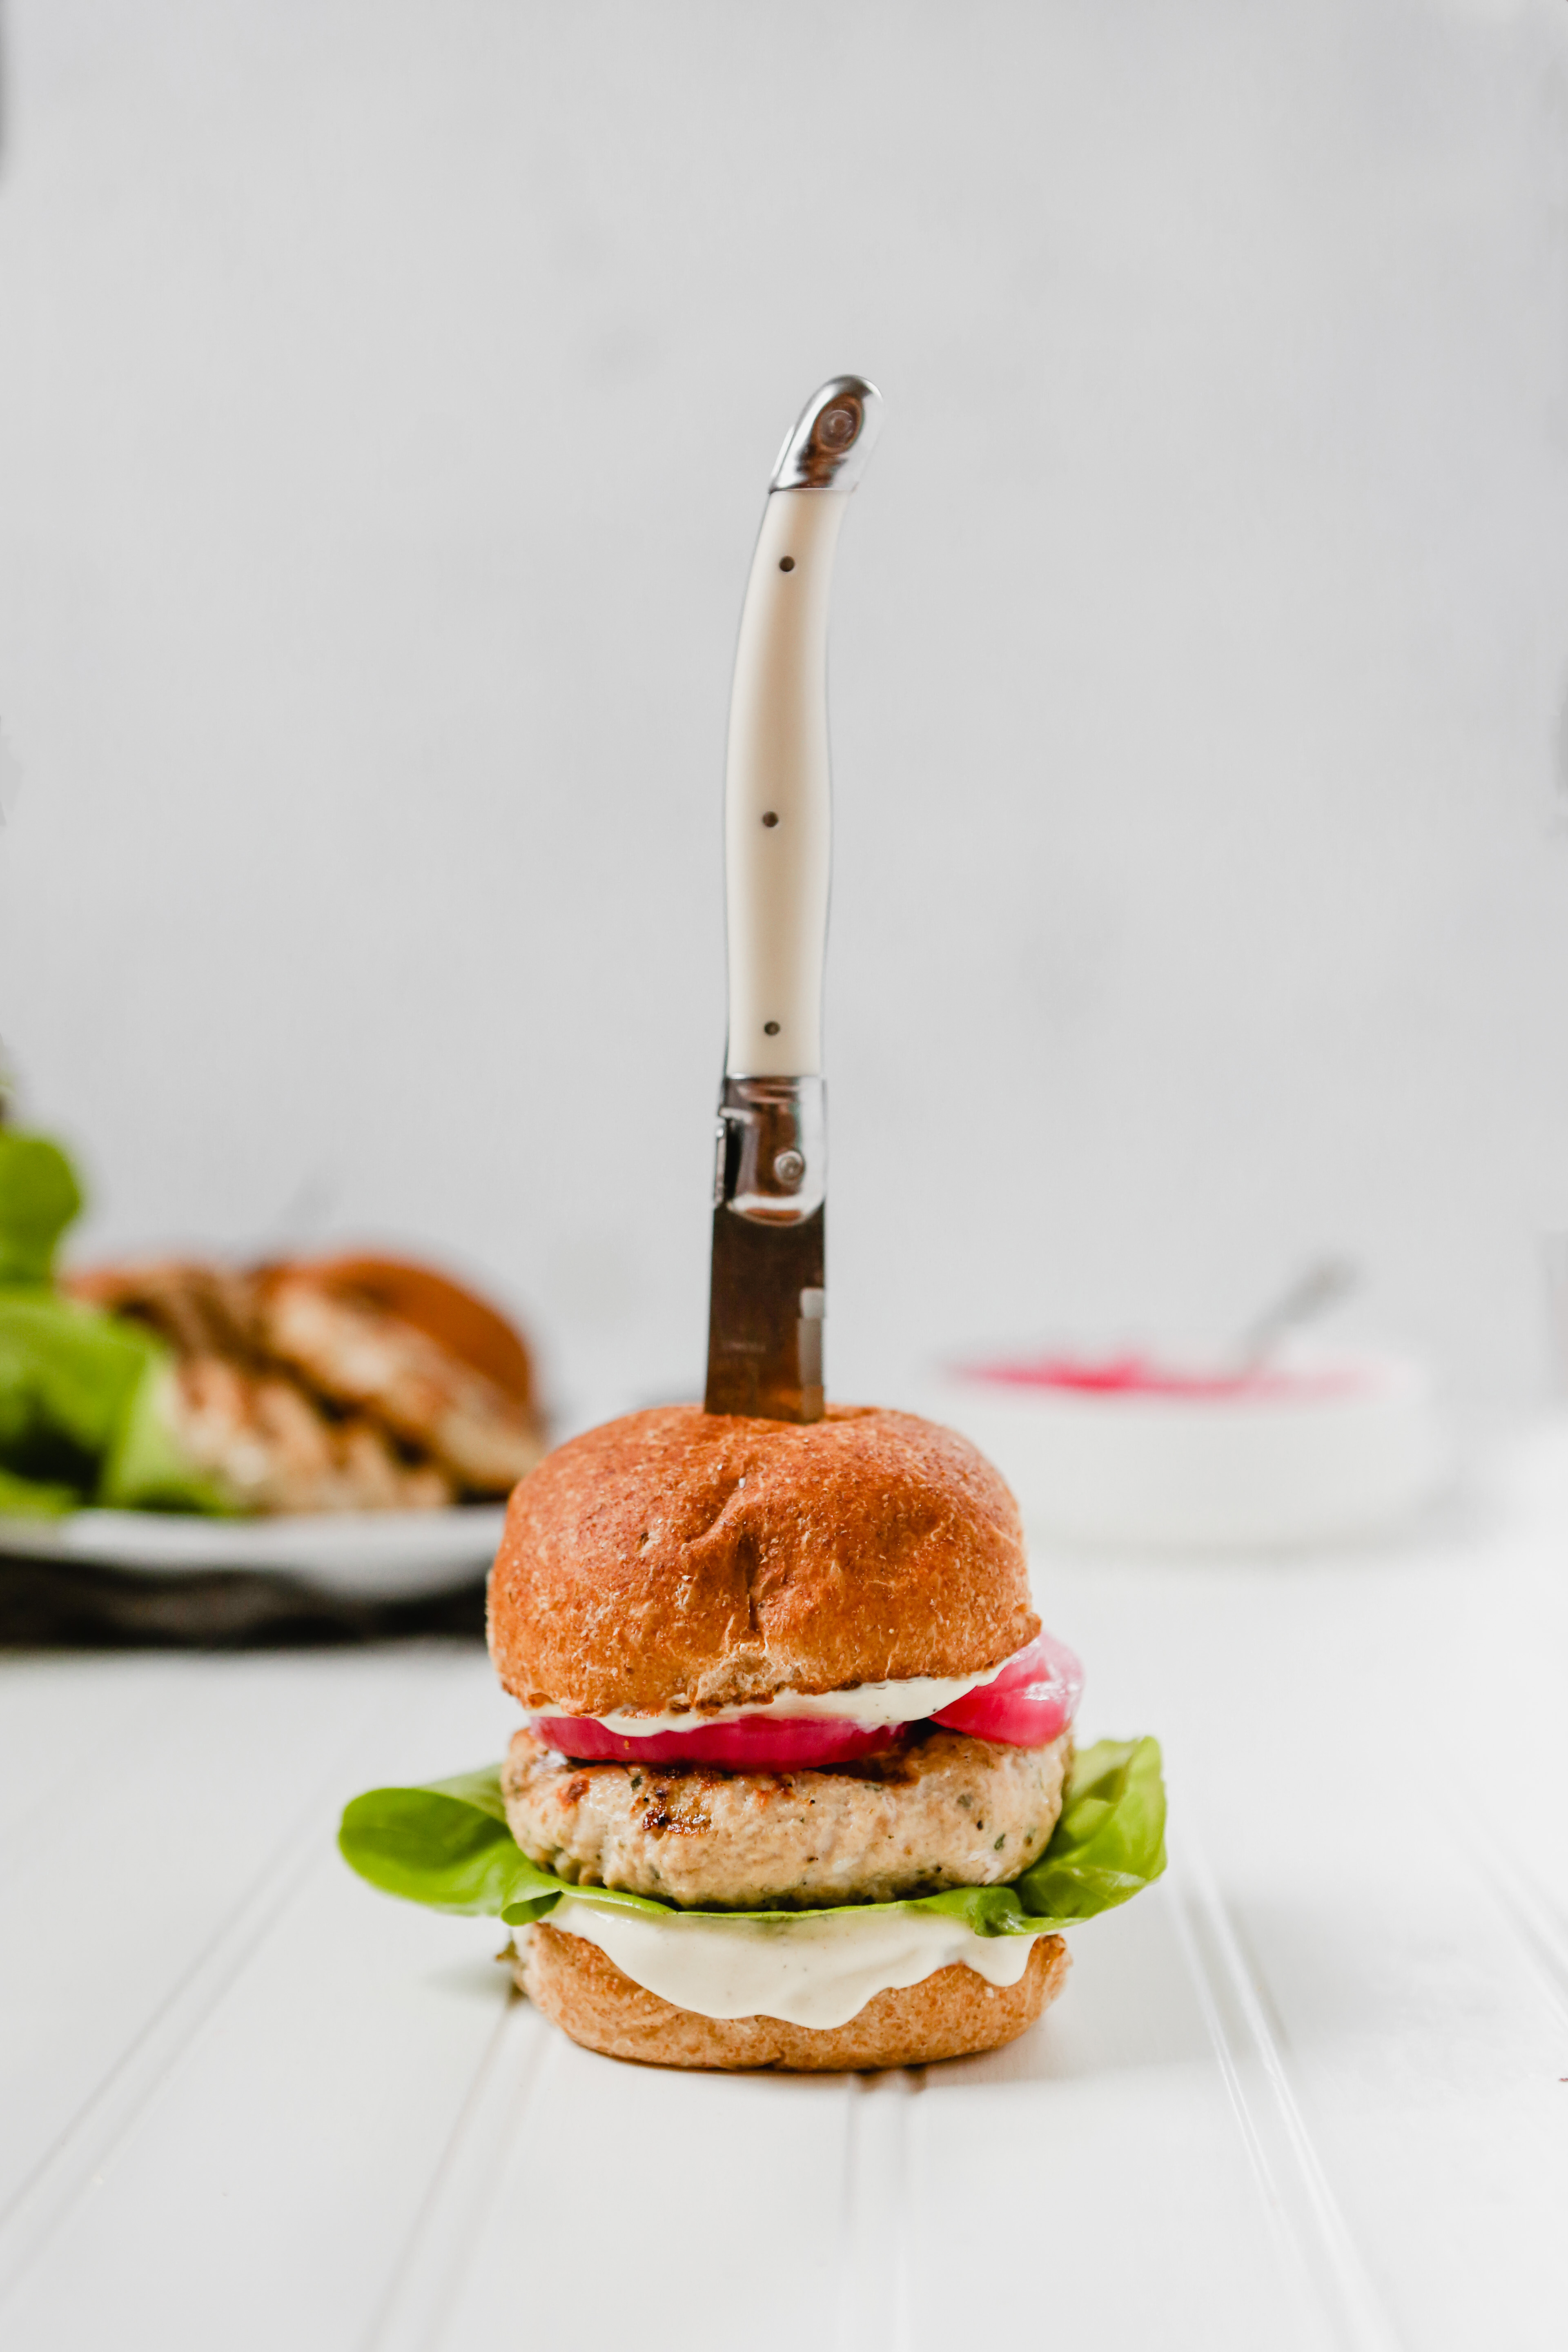 Photograph of turkey burger with steak knife stuck through the top